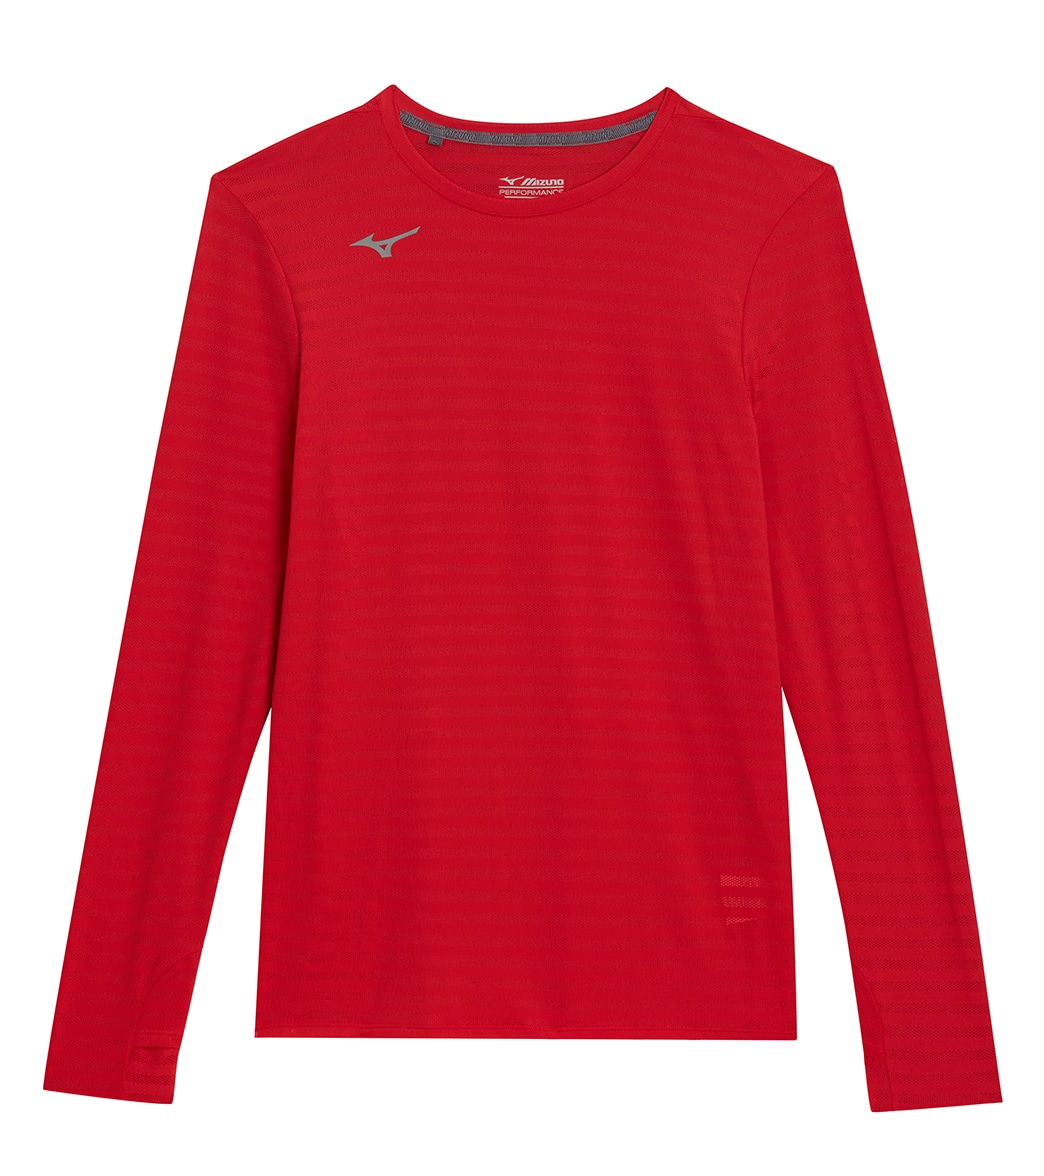 Mizuno Men's Athletic Eco Long Sleeve Top Shirt - Red Large - Swimoutlet.com